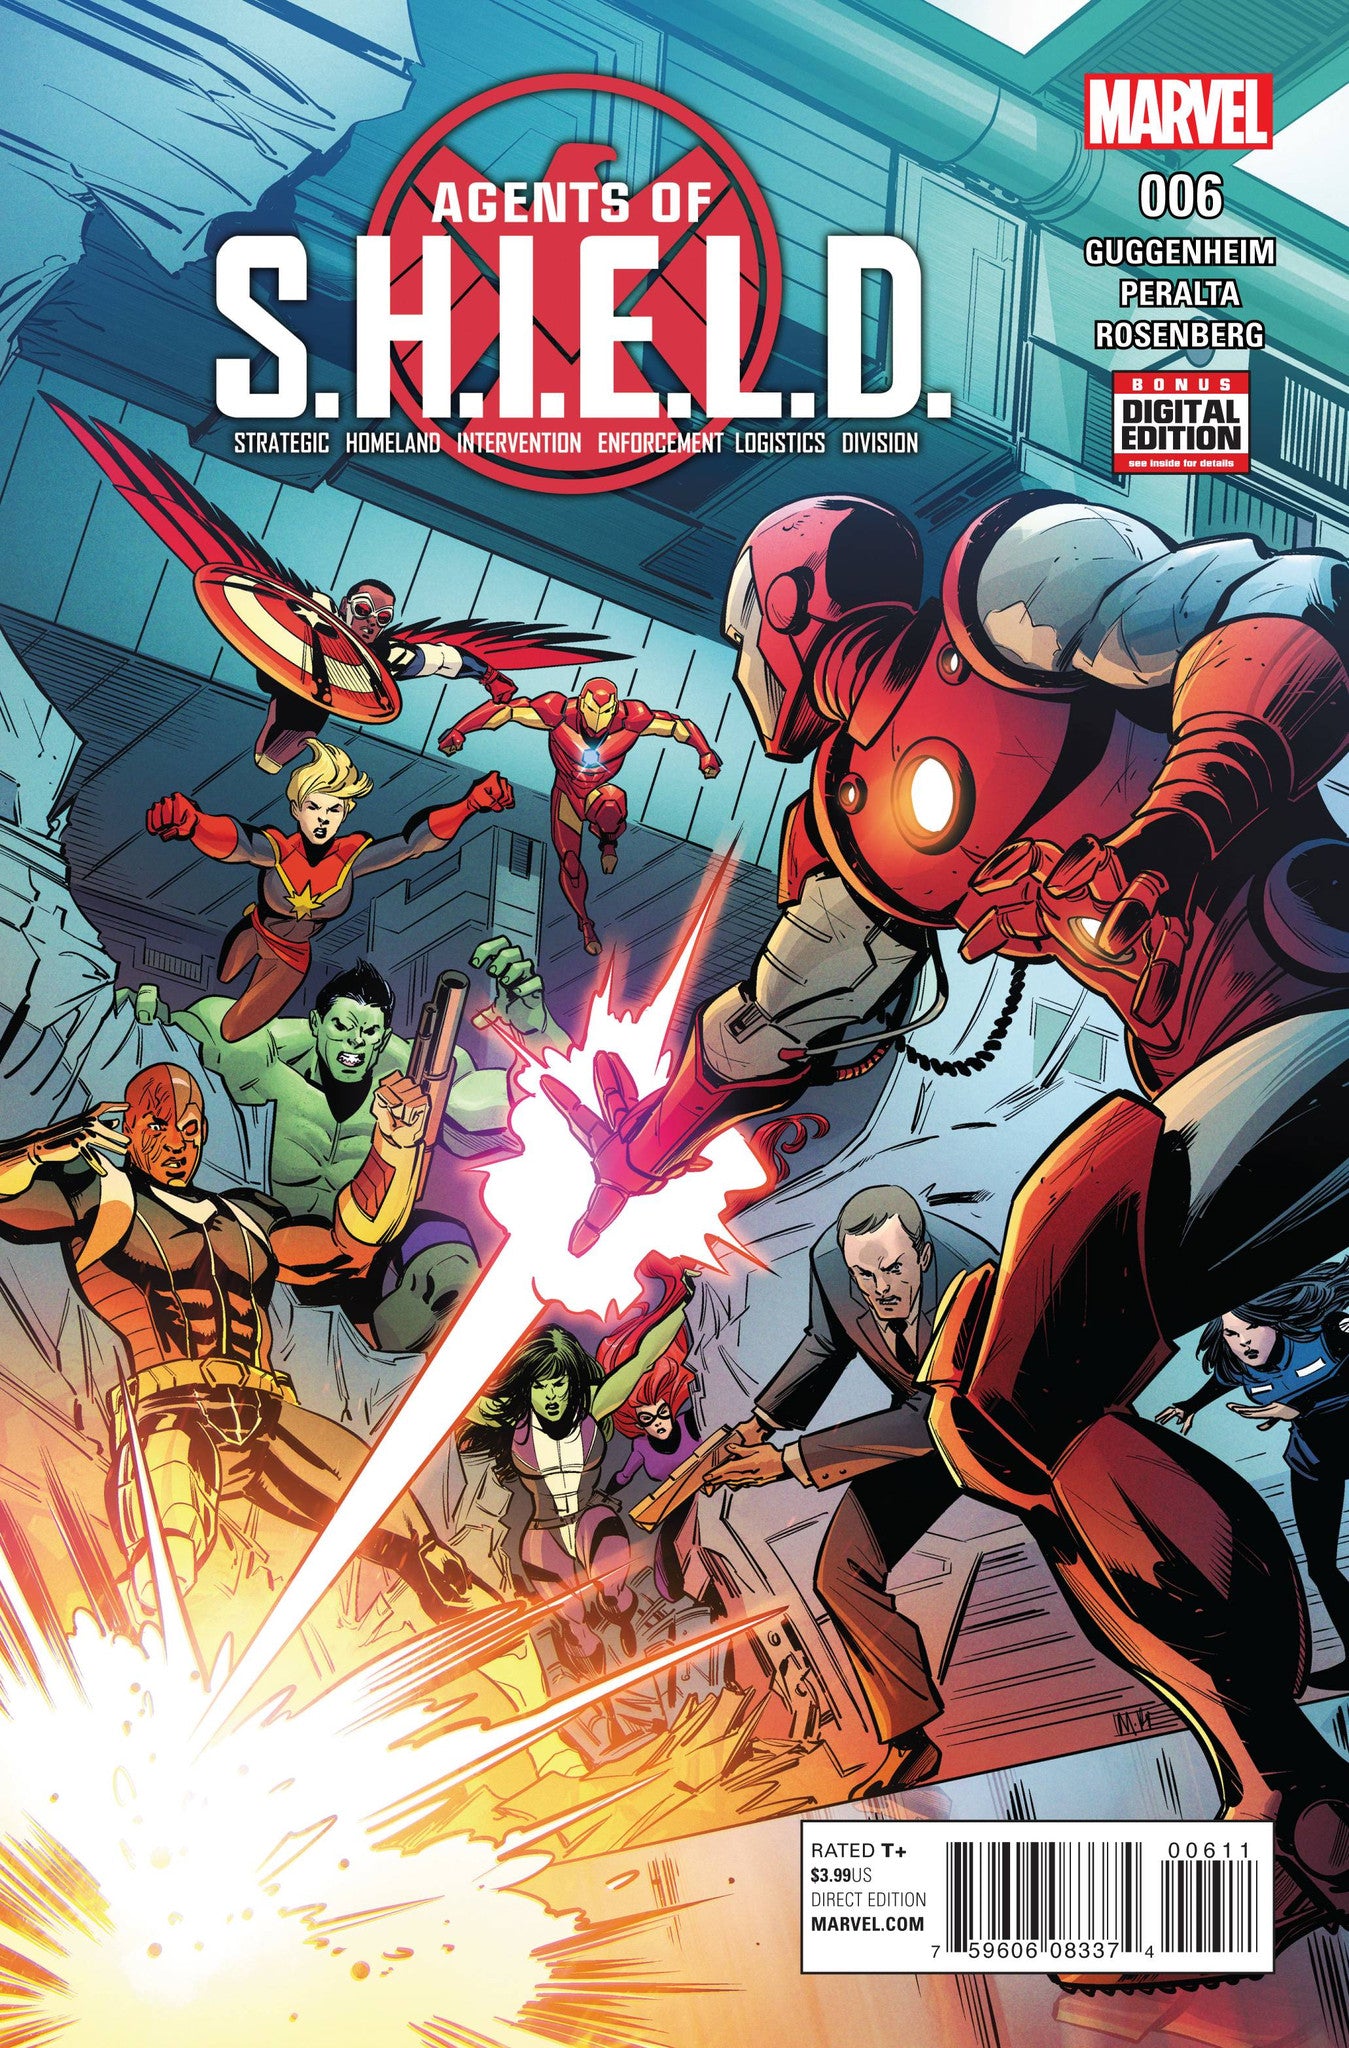 AGENTS OF SHIELD #6 COVER